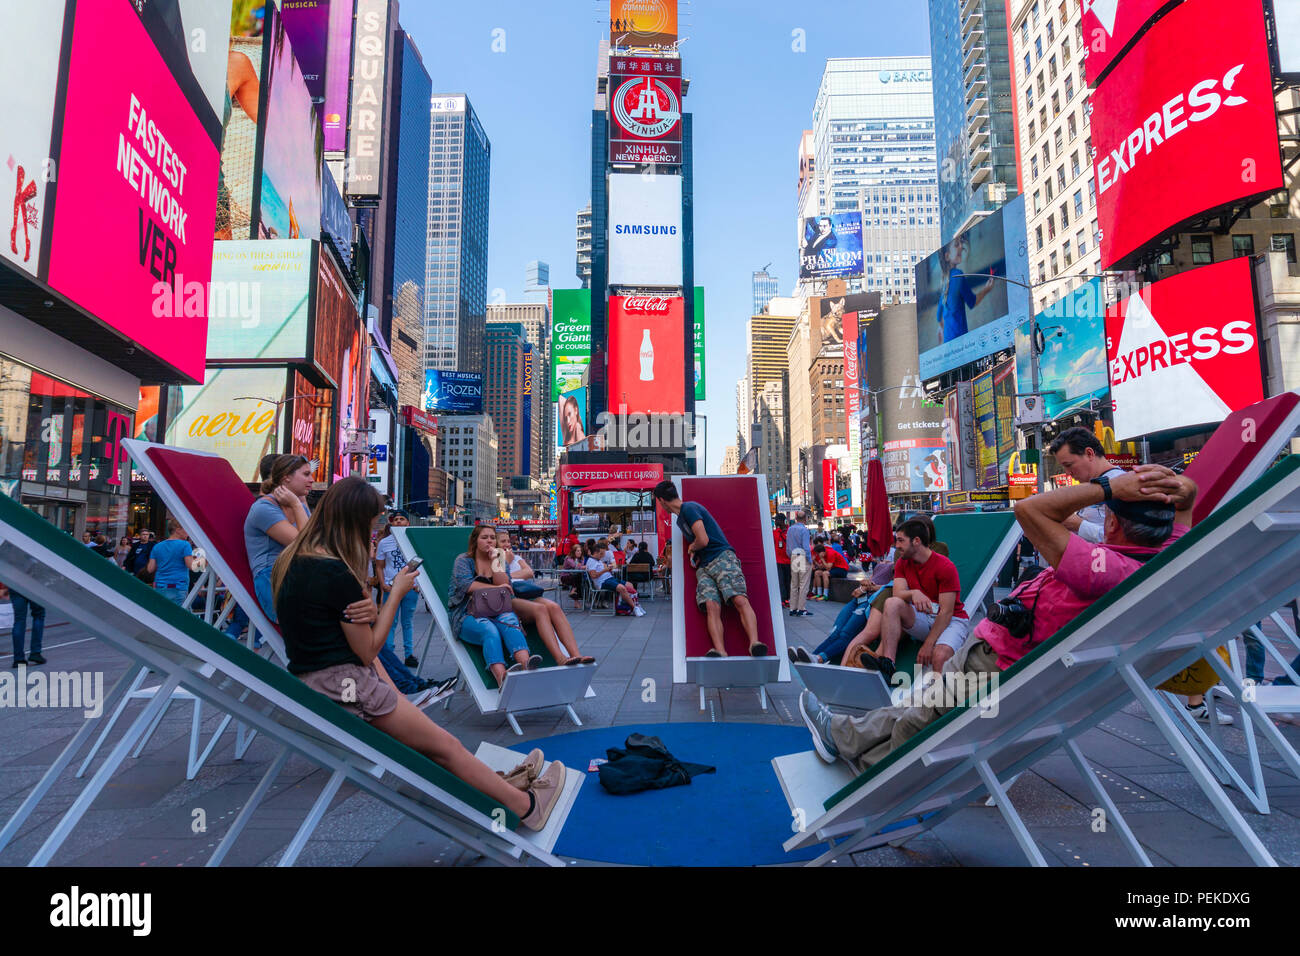 People relaxing at Times Square in New York City Stock Photo